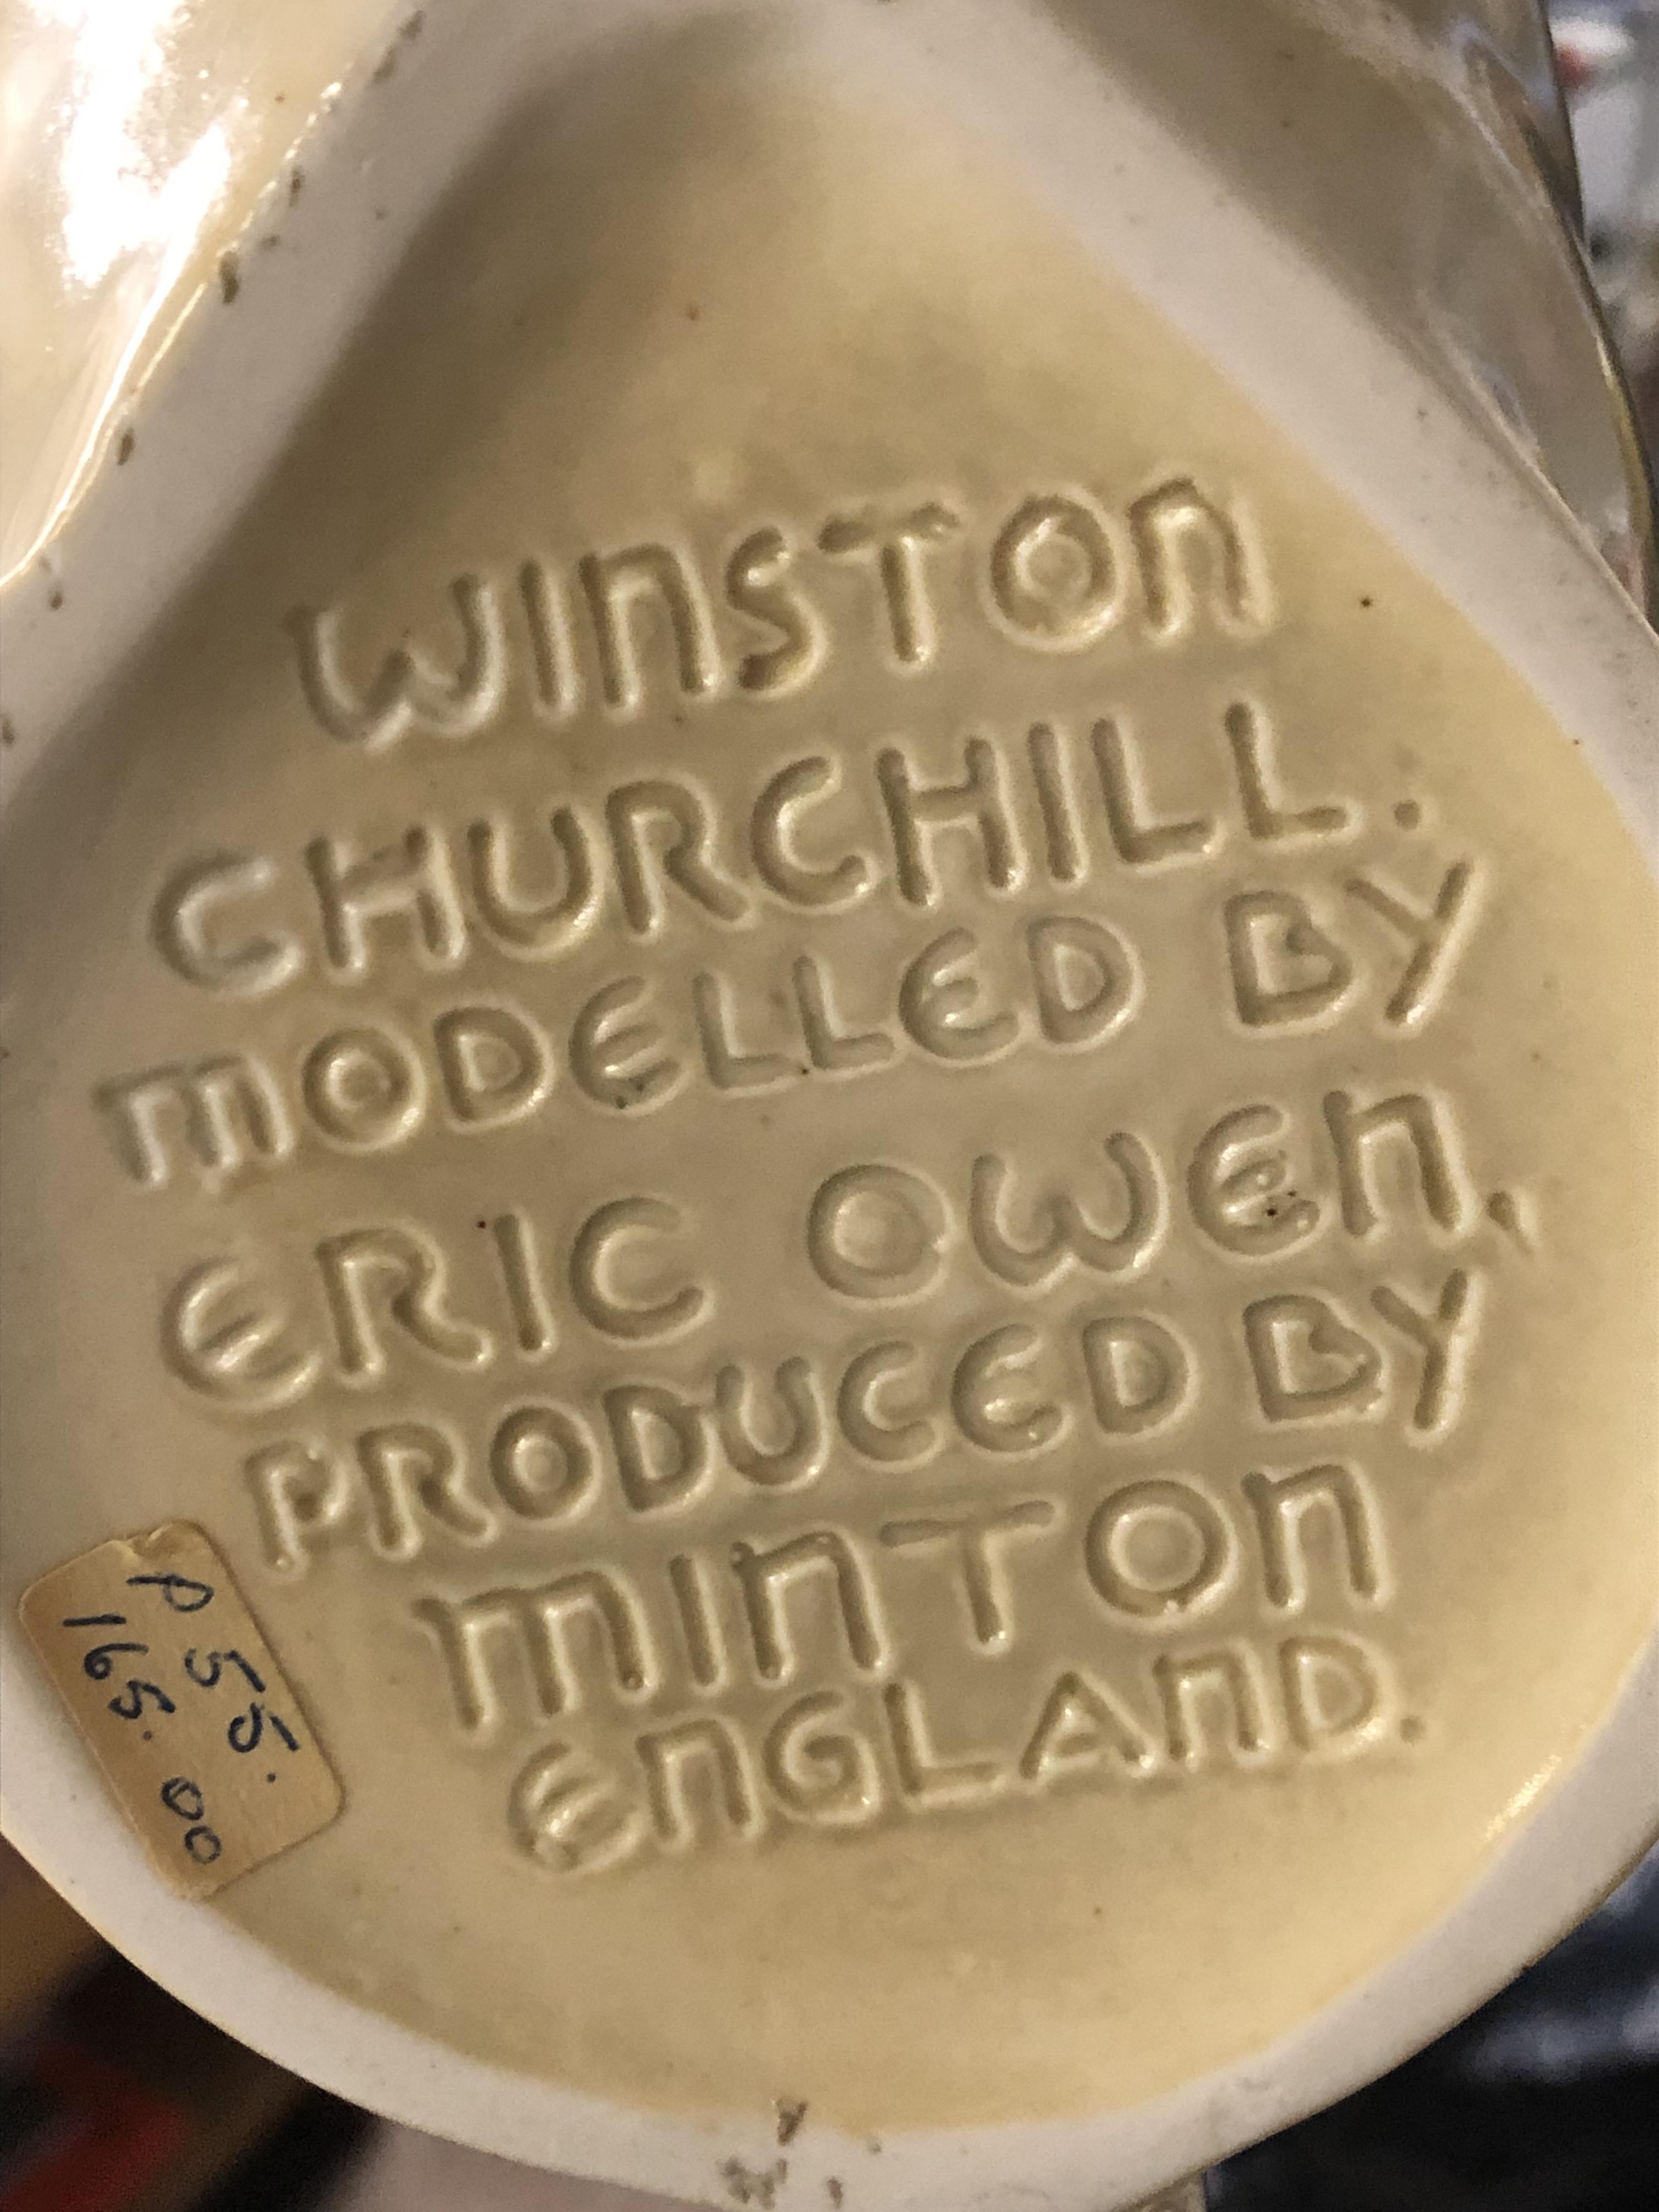 MINTON WINSTON CHURCHILL CHARACTER JUG MODELLED BY ERIC OWEN - Image 3 of 3